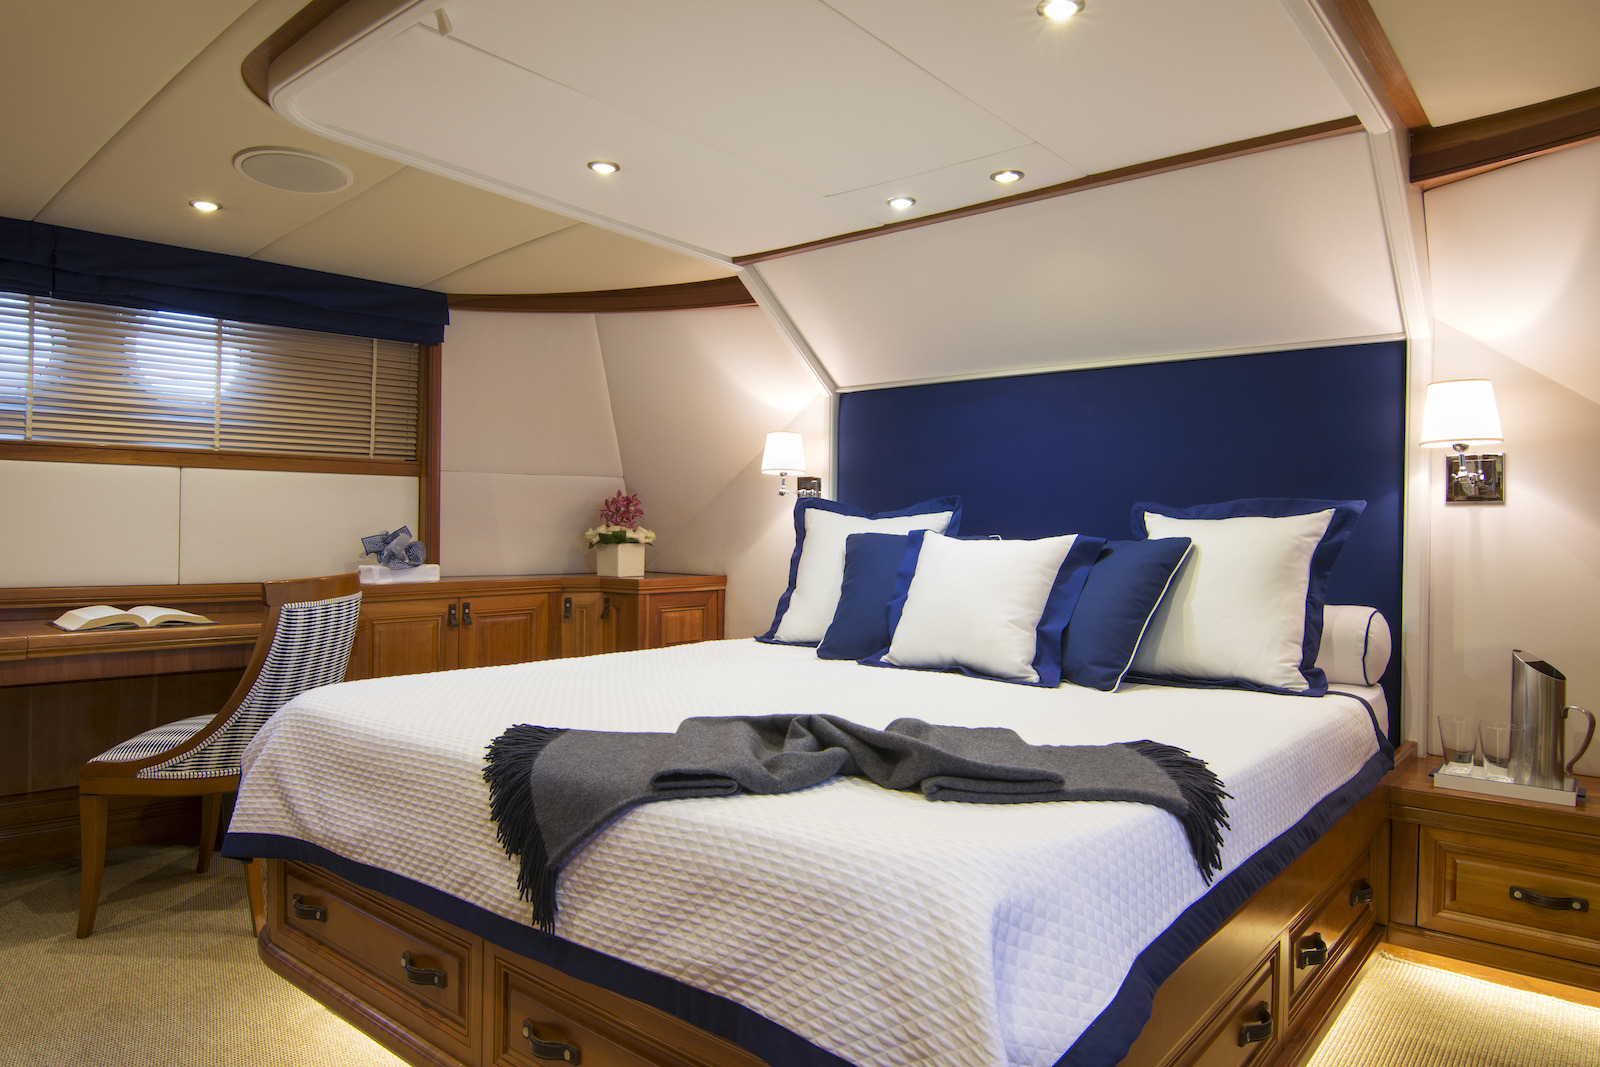 Master Stateroom On The Main Deck